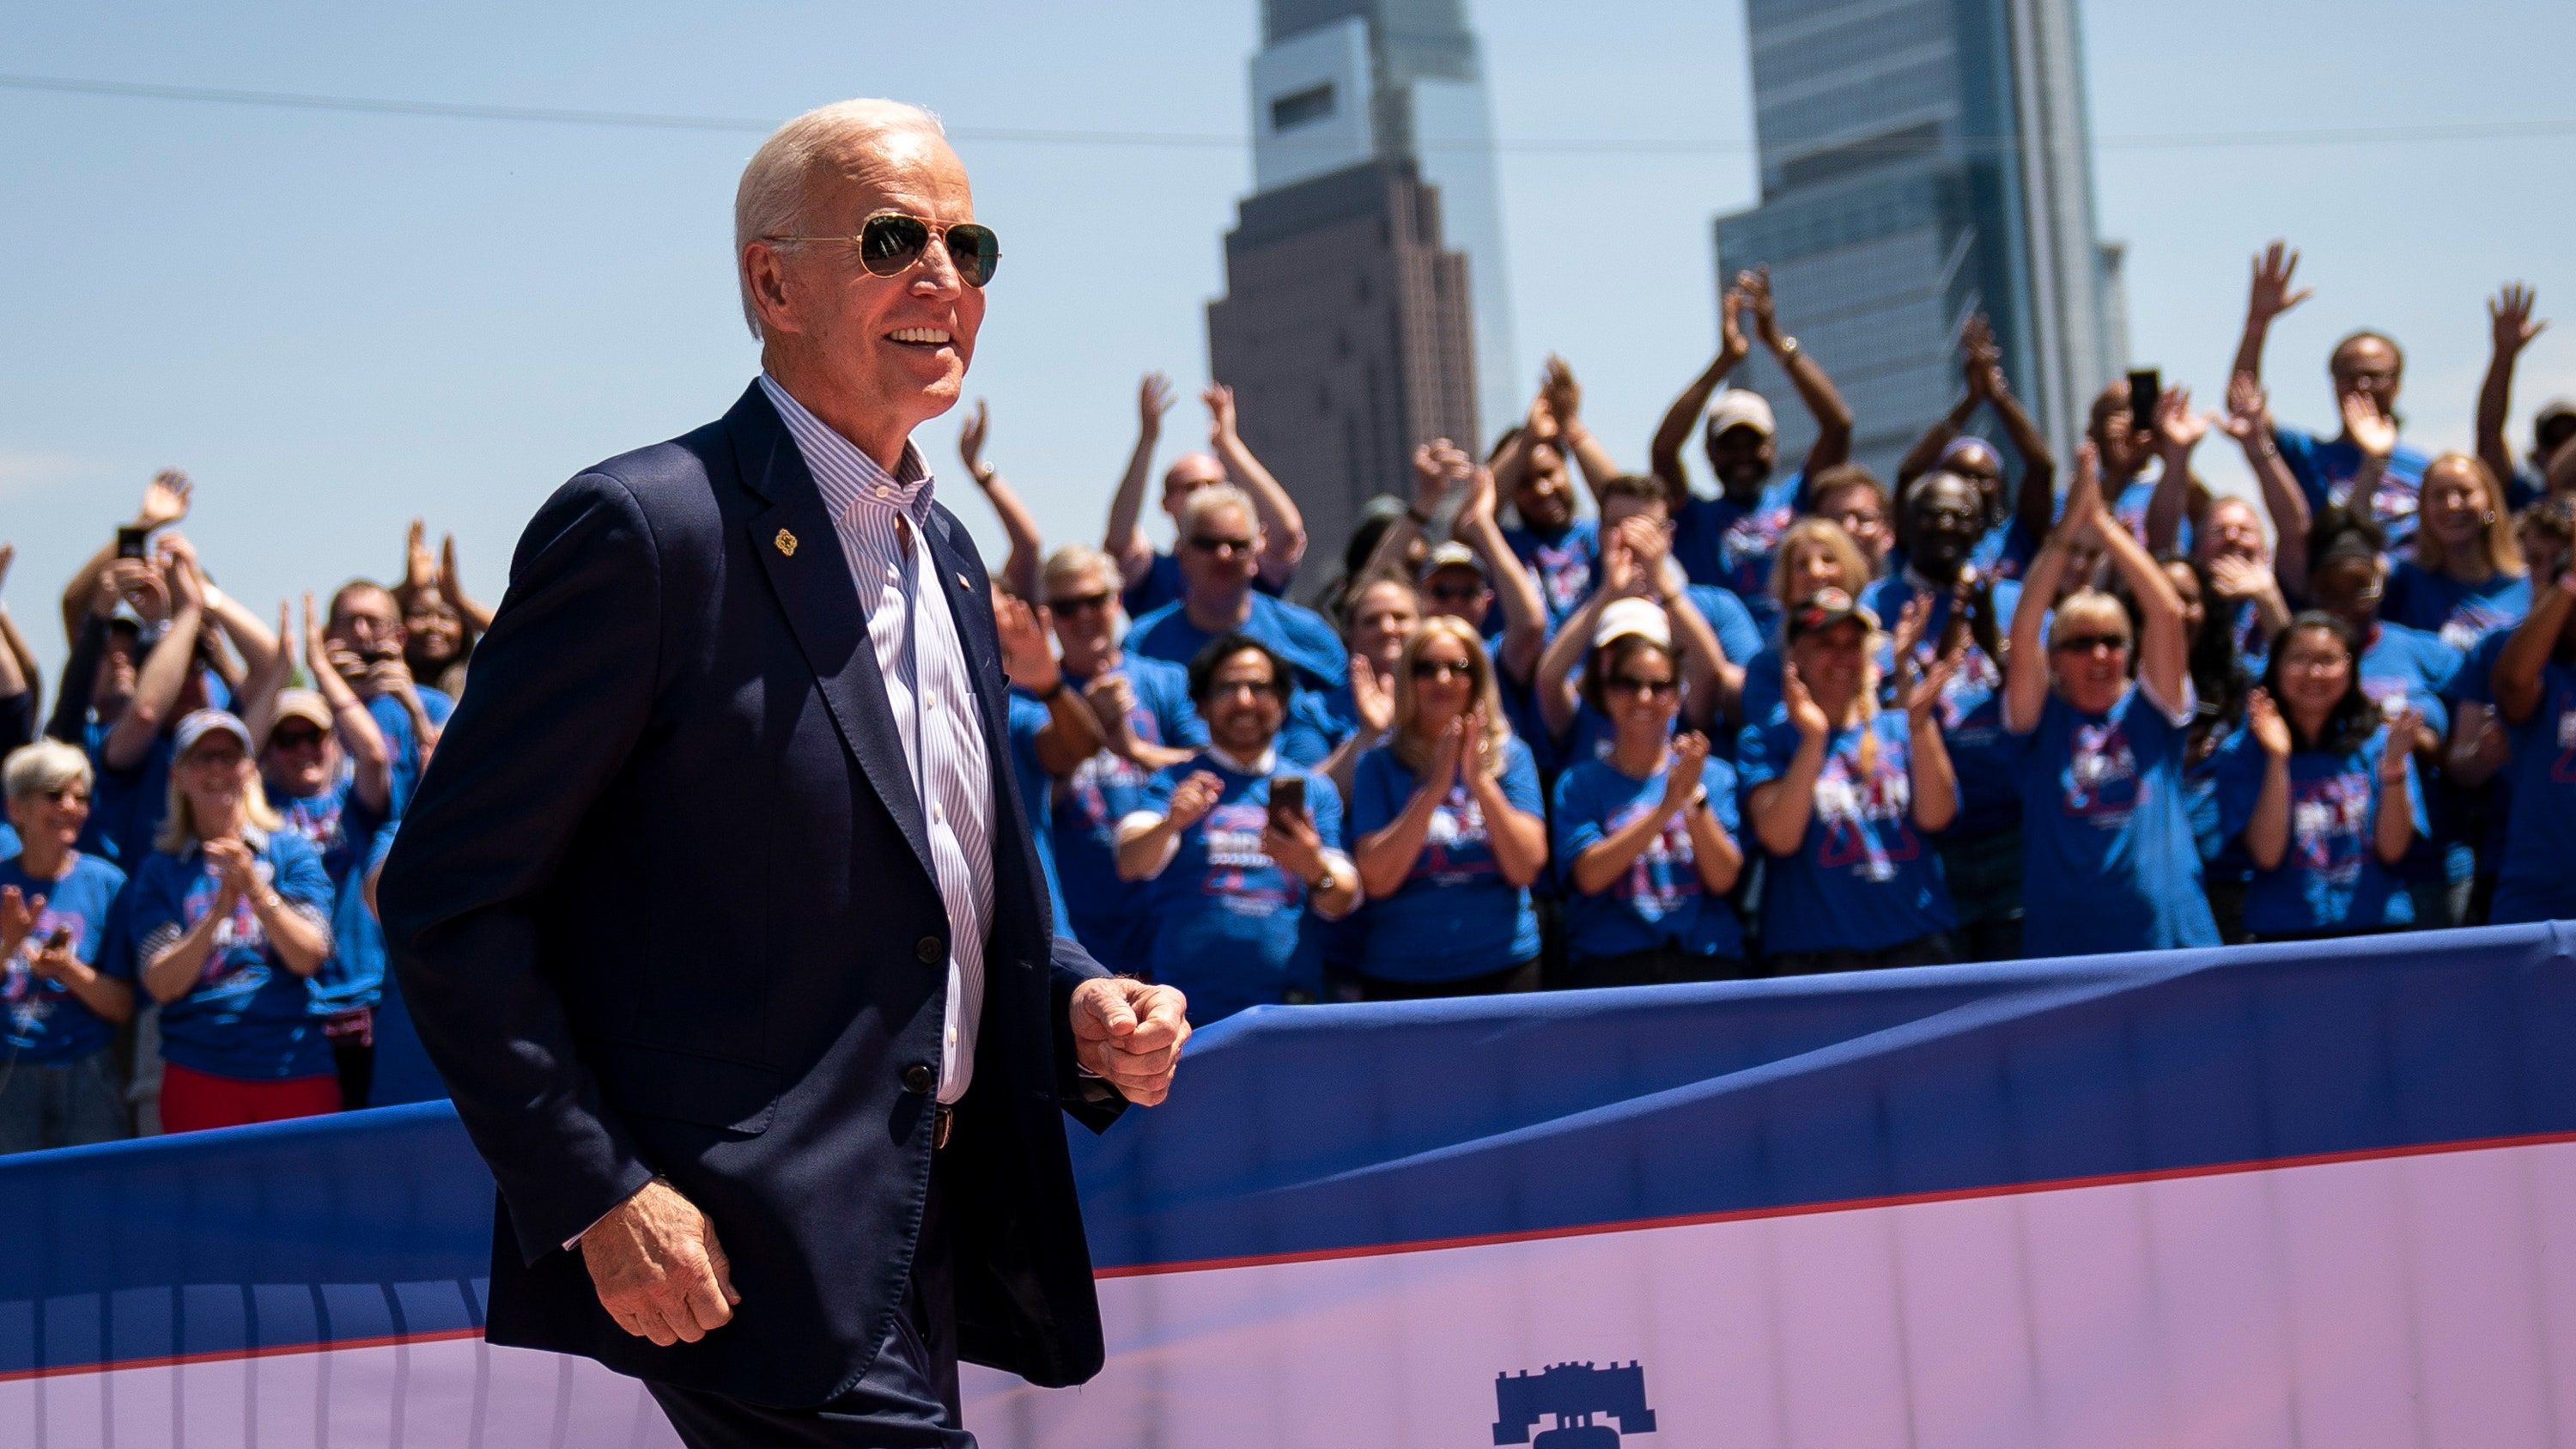 Joe Biden's 2020 Campaign Makes Me Sick with Fear for Our Future